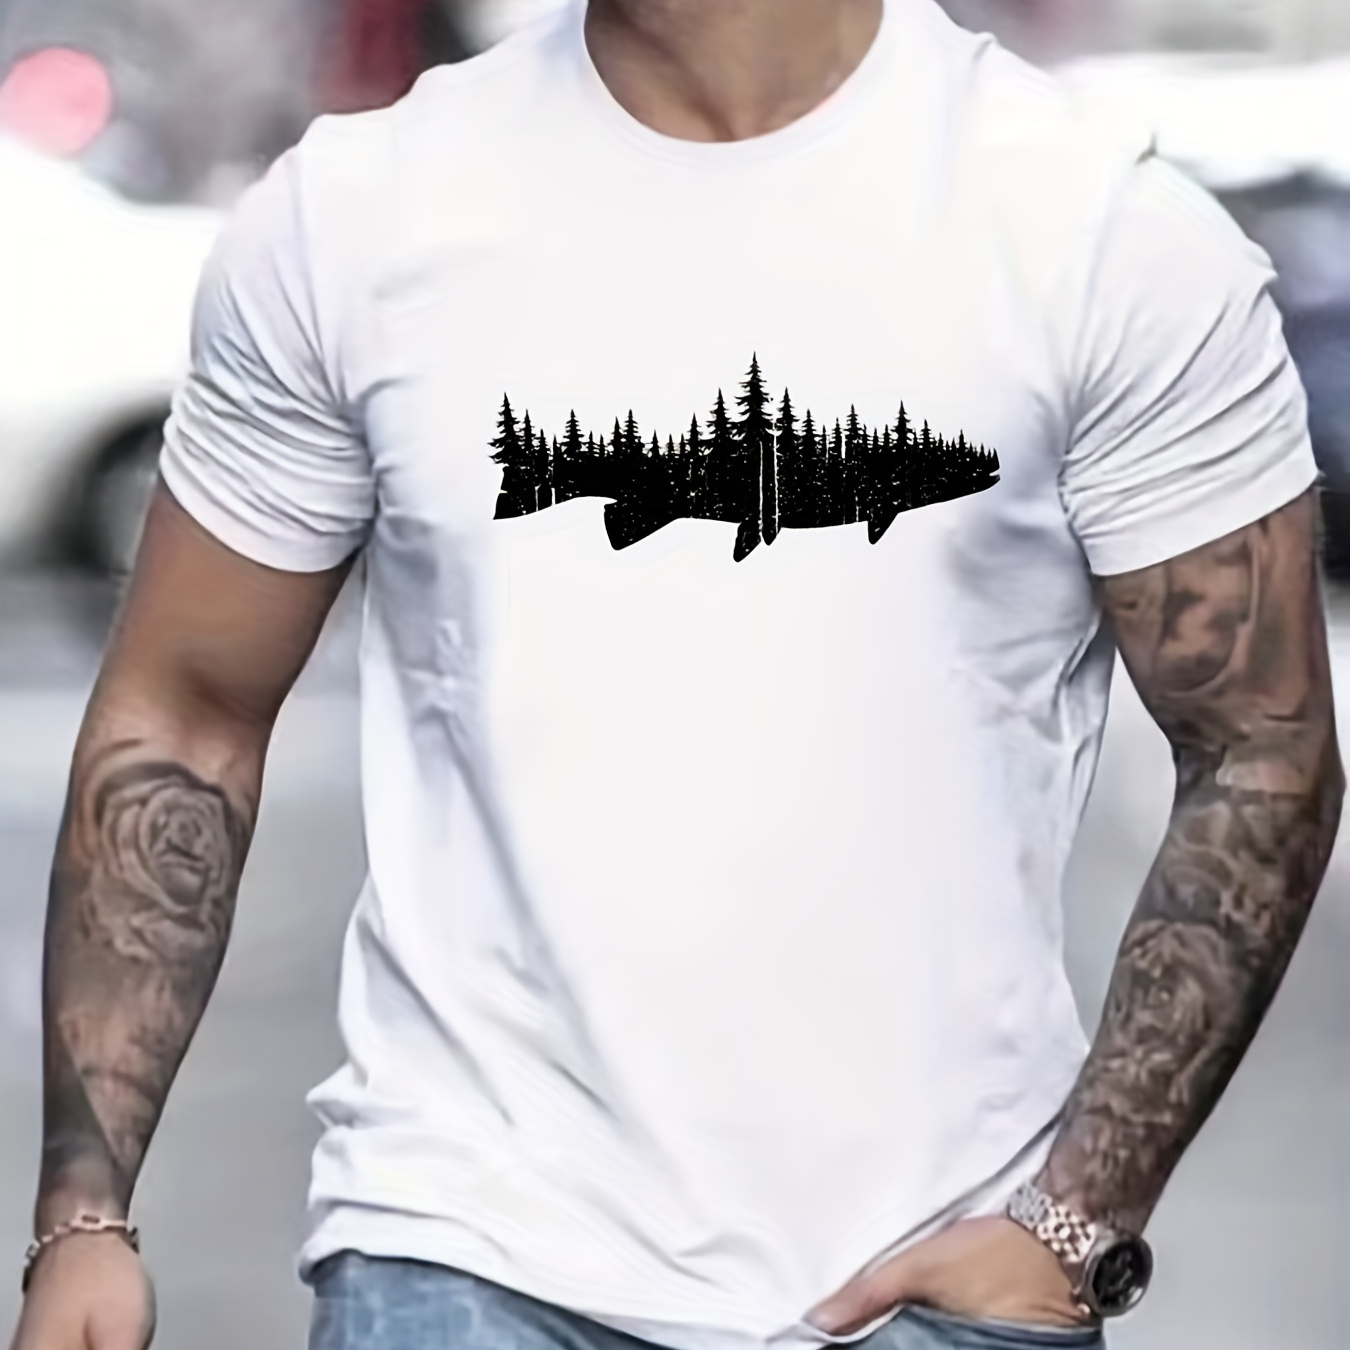 

Trendy Fish & Forest Pattern Print Men's Comfy Chic T-shirt, Graphic Tee Men's Summer Outdoor Clothes, Men's Clothing, Tops For Men, Gift For Men